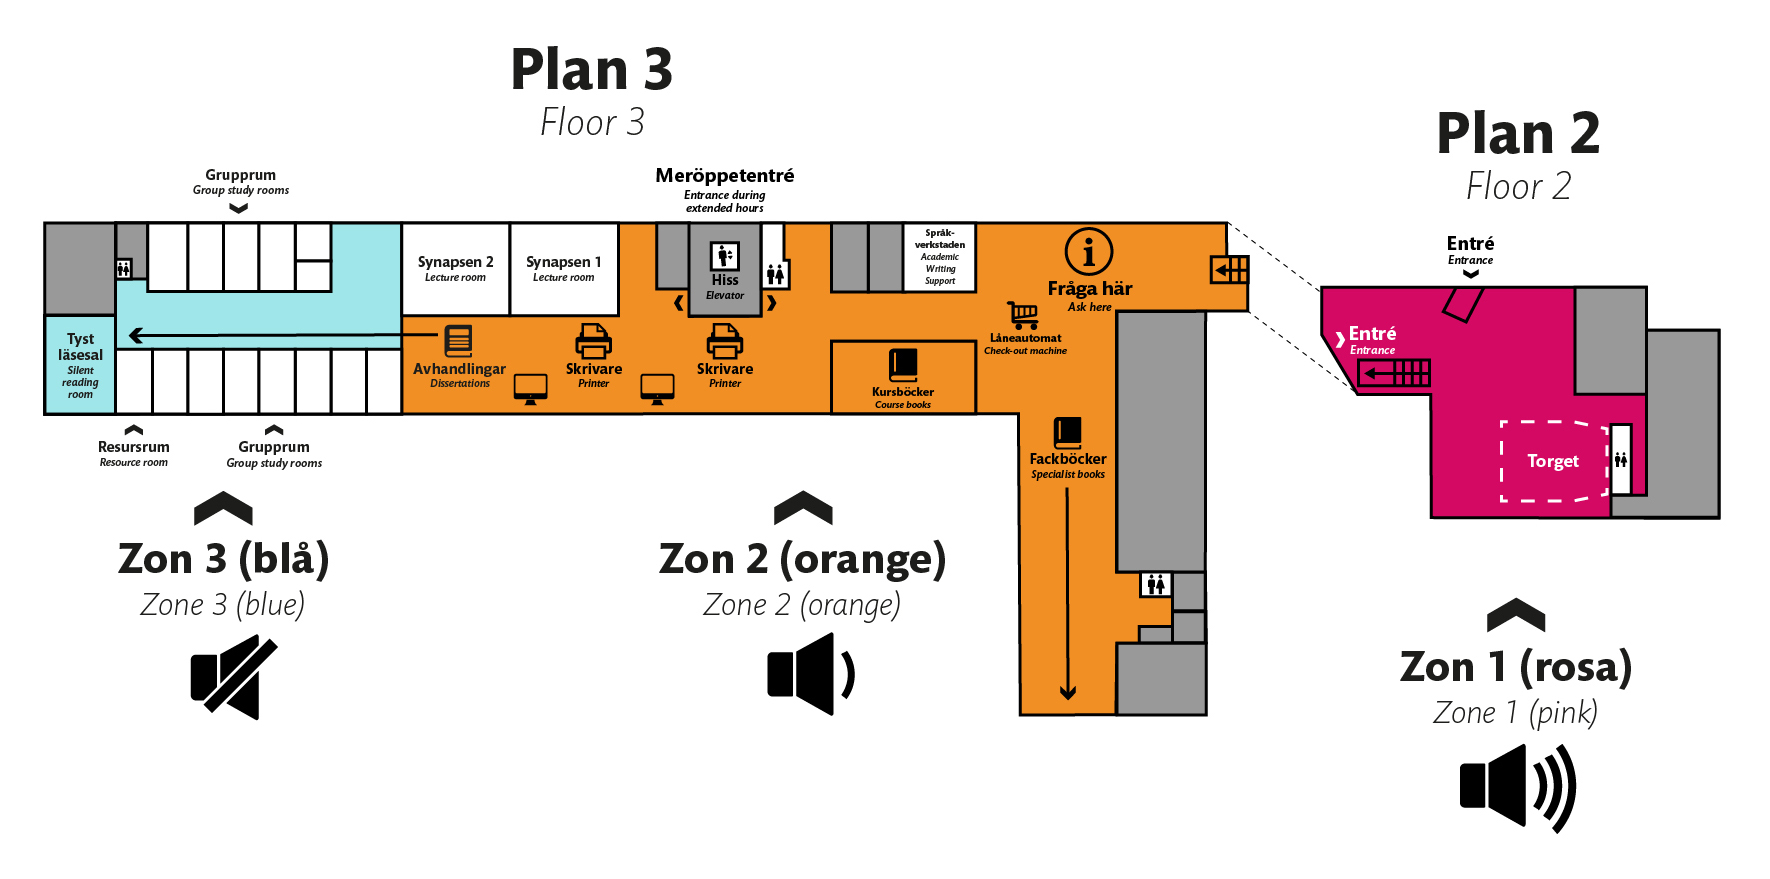 Noise zone map of Solna. At the entry level (floor 2) it is ok to talk freely. When you have gone up to floor 3, you need to speak with a low voice. Outside the group rooms and the silent study room you need to be quiet.